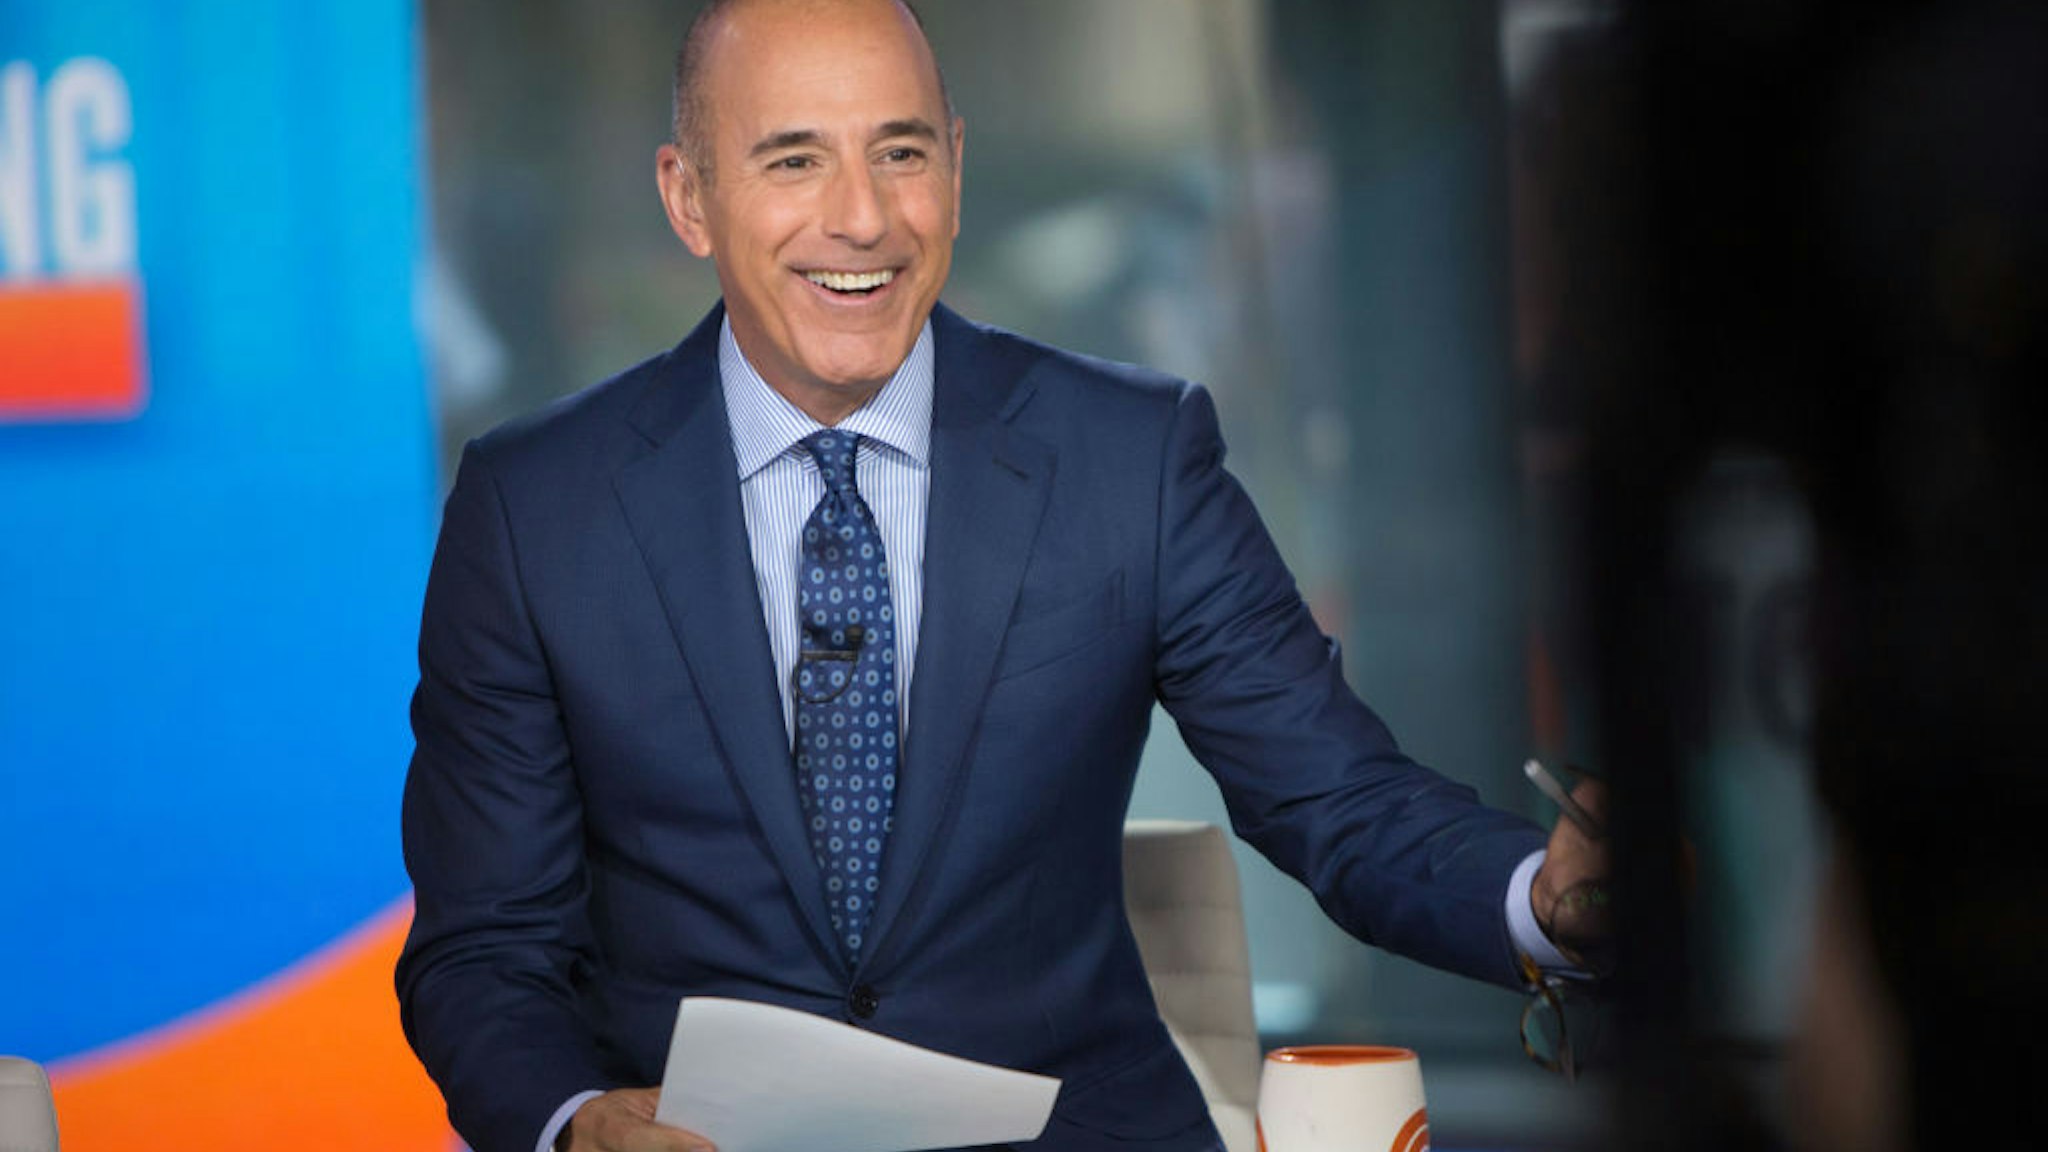 TODAY -- Pictured: Matt Lauer on Friday, Aug.11, 2017